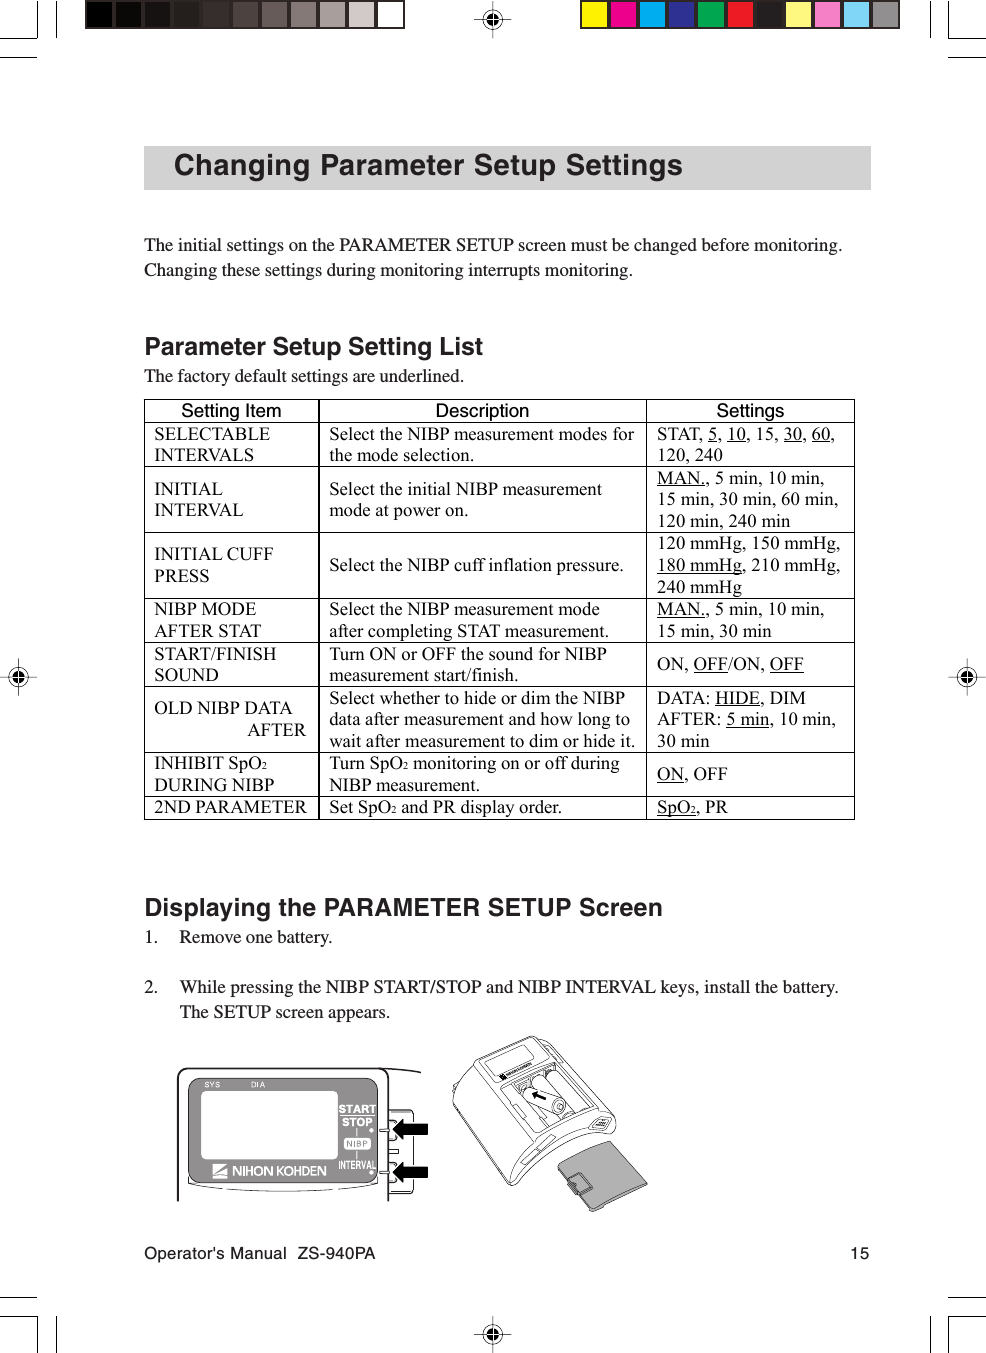 Operator&apos;s Manual  ZS-940PA 15Changing Parameter Setup SettingsThe initial settings on the PARAMETER SETUP screen must be changed before monitoring.Changing these settings during monitoring interrupts monitoring.Parameter Setup Setting ListThe factory default settings are underlined.Setting Item Description SettingsSELECTABLEINTERVALSSelect the NIBP measurement modes forthe mode selection.STAT, 5, 10, 15, 30, 60,120, 240INITIALINTERVALSelect the initial NIBP measurementmode at power on.MAN., 5 min, 10 min,15 min, 30 min, 60 min,120 min, 240 minINITIAL CUFFPRESS Select the NIBP cuff inflation pressure.120 mmHg, 150 mmHg,180 mmHg, 210 mmHg,240 mmHgNIBP MODEAFTER STATSelect the NIBP measurement modeafter completing STAT measurement.MAN., 5 min, 10 min,15 min, 30 minSTART/FINISHSOUNDTurn ON or OFF the sound for NIBPmeasurement start/finish. ON, OFF/ON, OFFOLD NIBP DATA          AFTERSelect whether to hide or dim the NIBPdata after measurement and how long towait after measurement to dim or hide it.DATA: HIDE, DIMAFTER: 5 min, 10 min,30 minINHIBIT SpO2DURING NIBPTurn SpO2 monitoring on or off duringNIBP measurement. ON, OFF2ND PARAMETER Set SpO2 and PR display order. SpO2, PRDisplaying the PARAMETER SETUP Screen1. Remove one battery.2. While pressing the NIBP START/STOP and NIBP INTERVAL keys, install the battery.The SETUP screen appears.